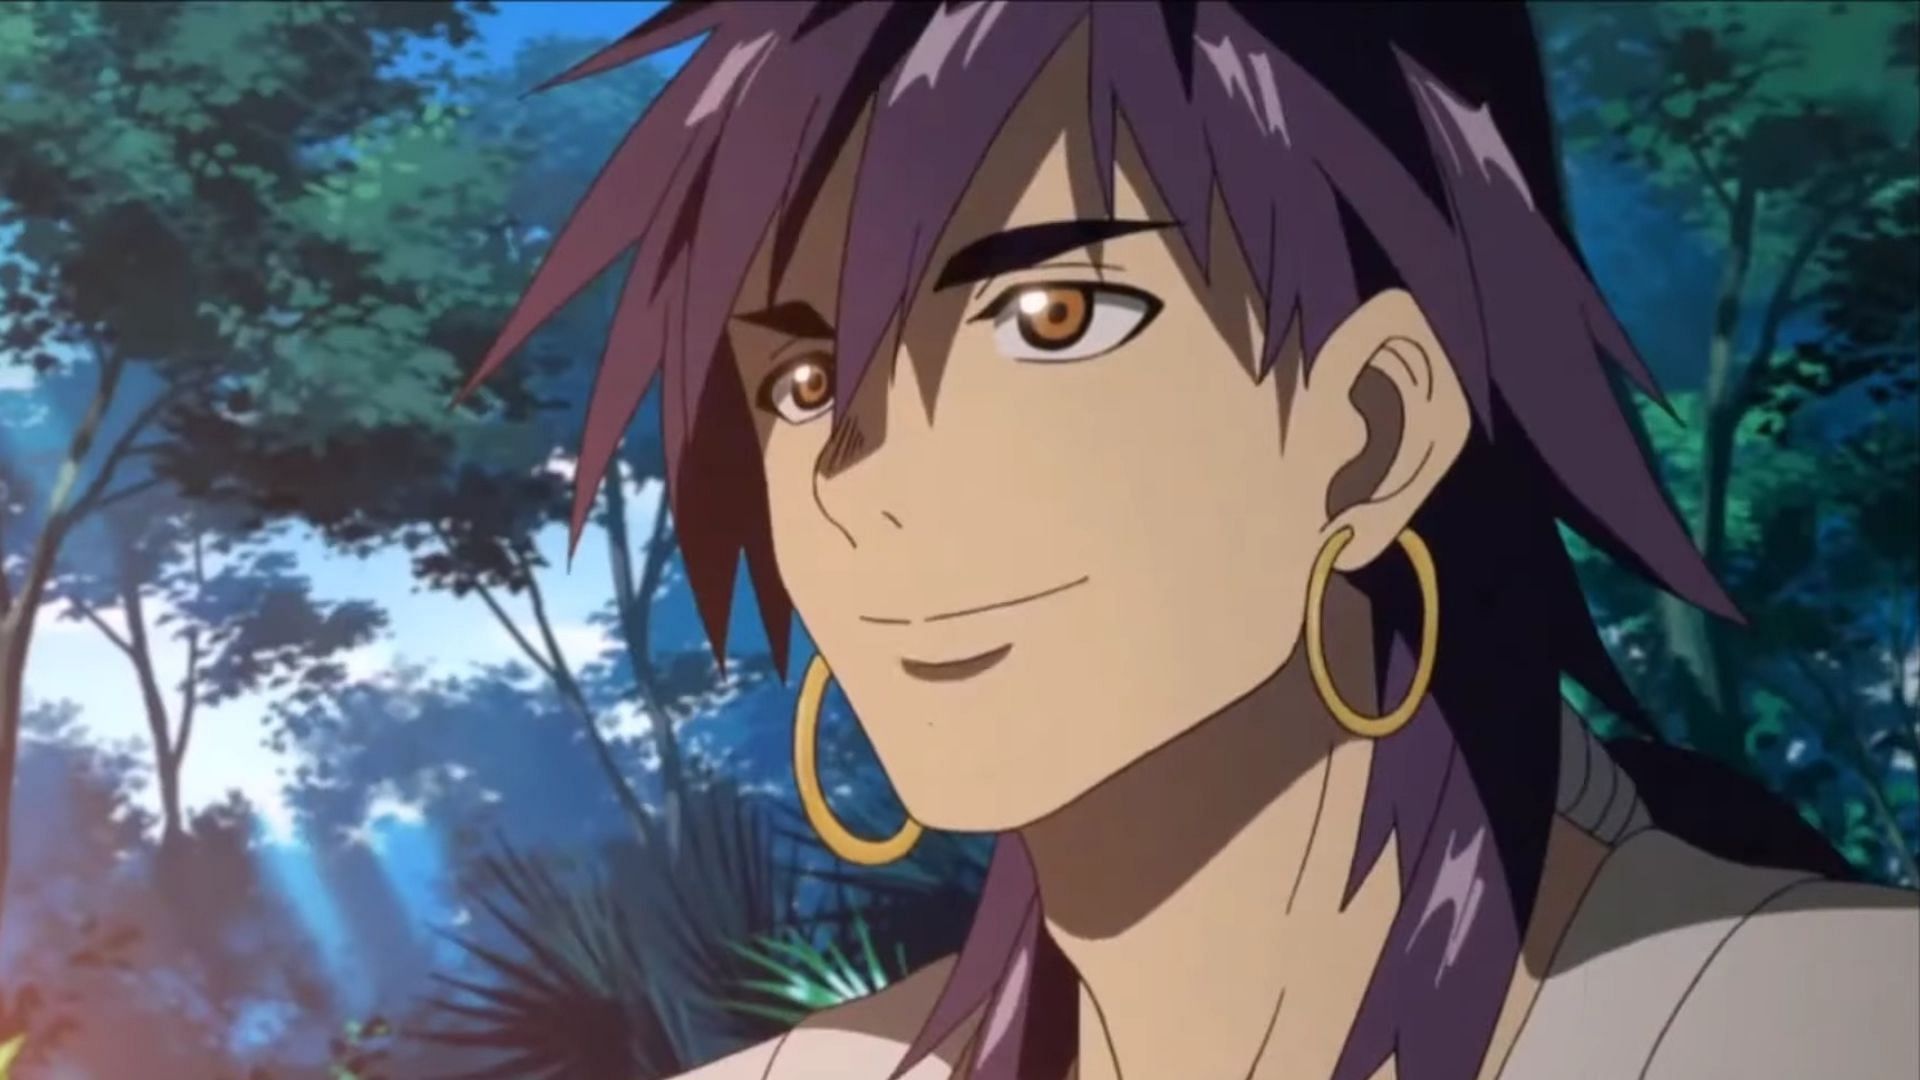 Where to Watch & Read Magi: The Labyrinth of Magic